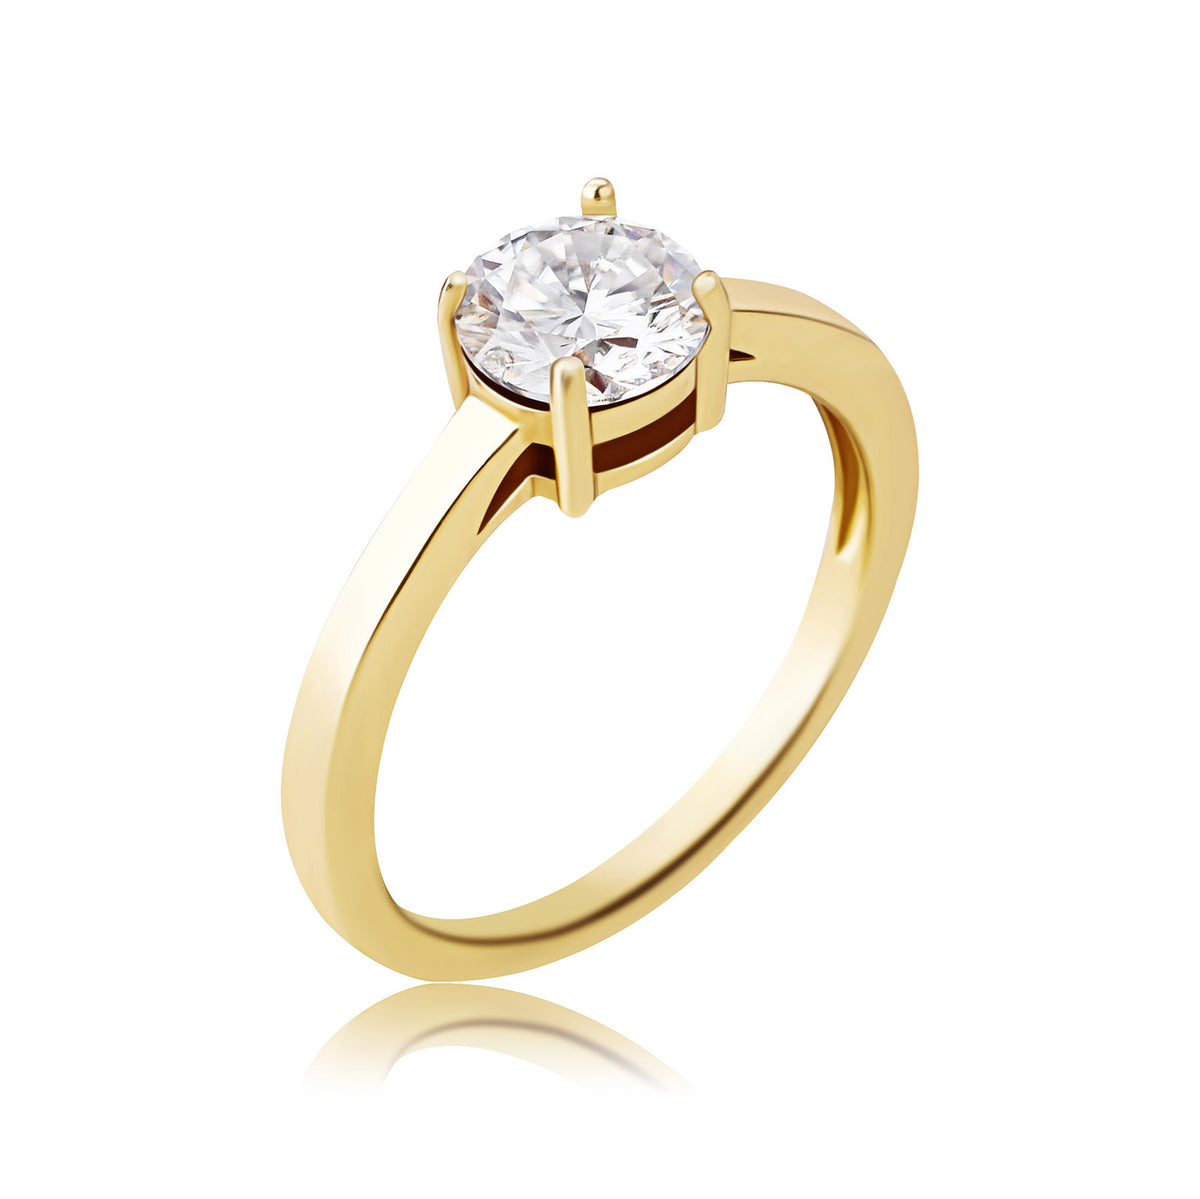 Bare 4 Prong Solitaire Round Cut Moissanite Diamond Ring in Yellow/White Gold